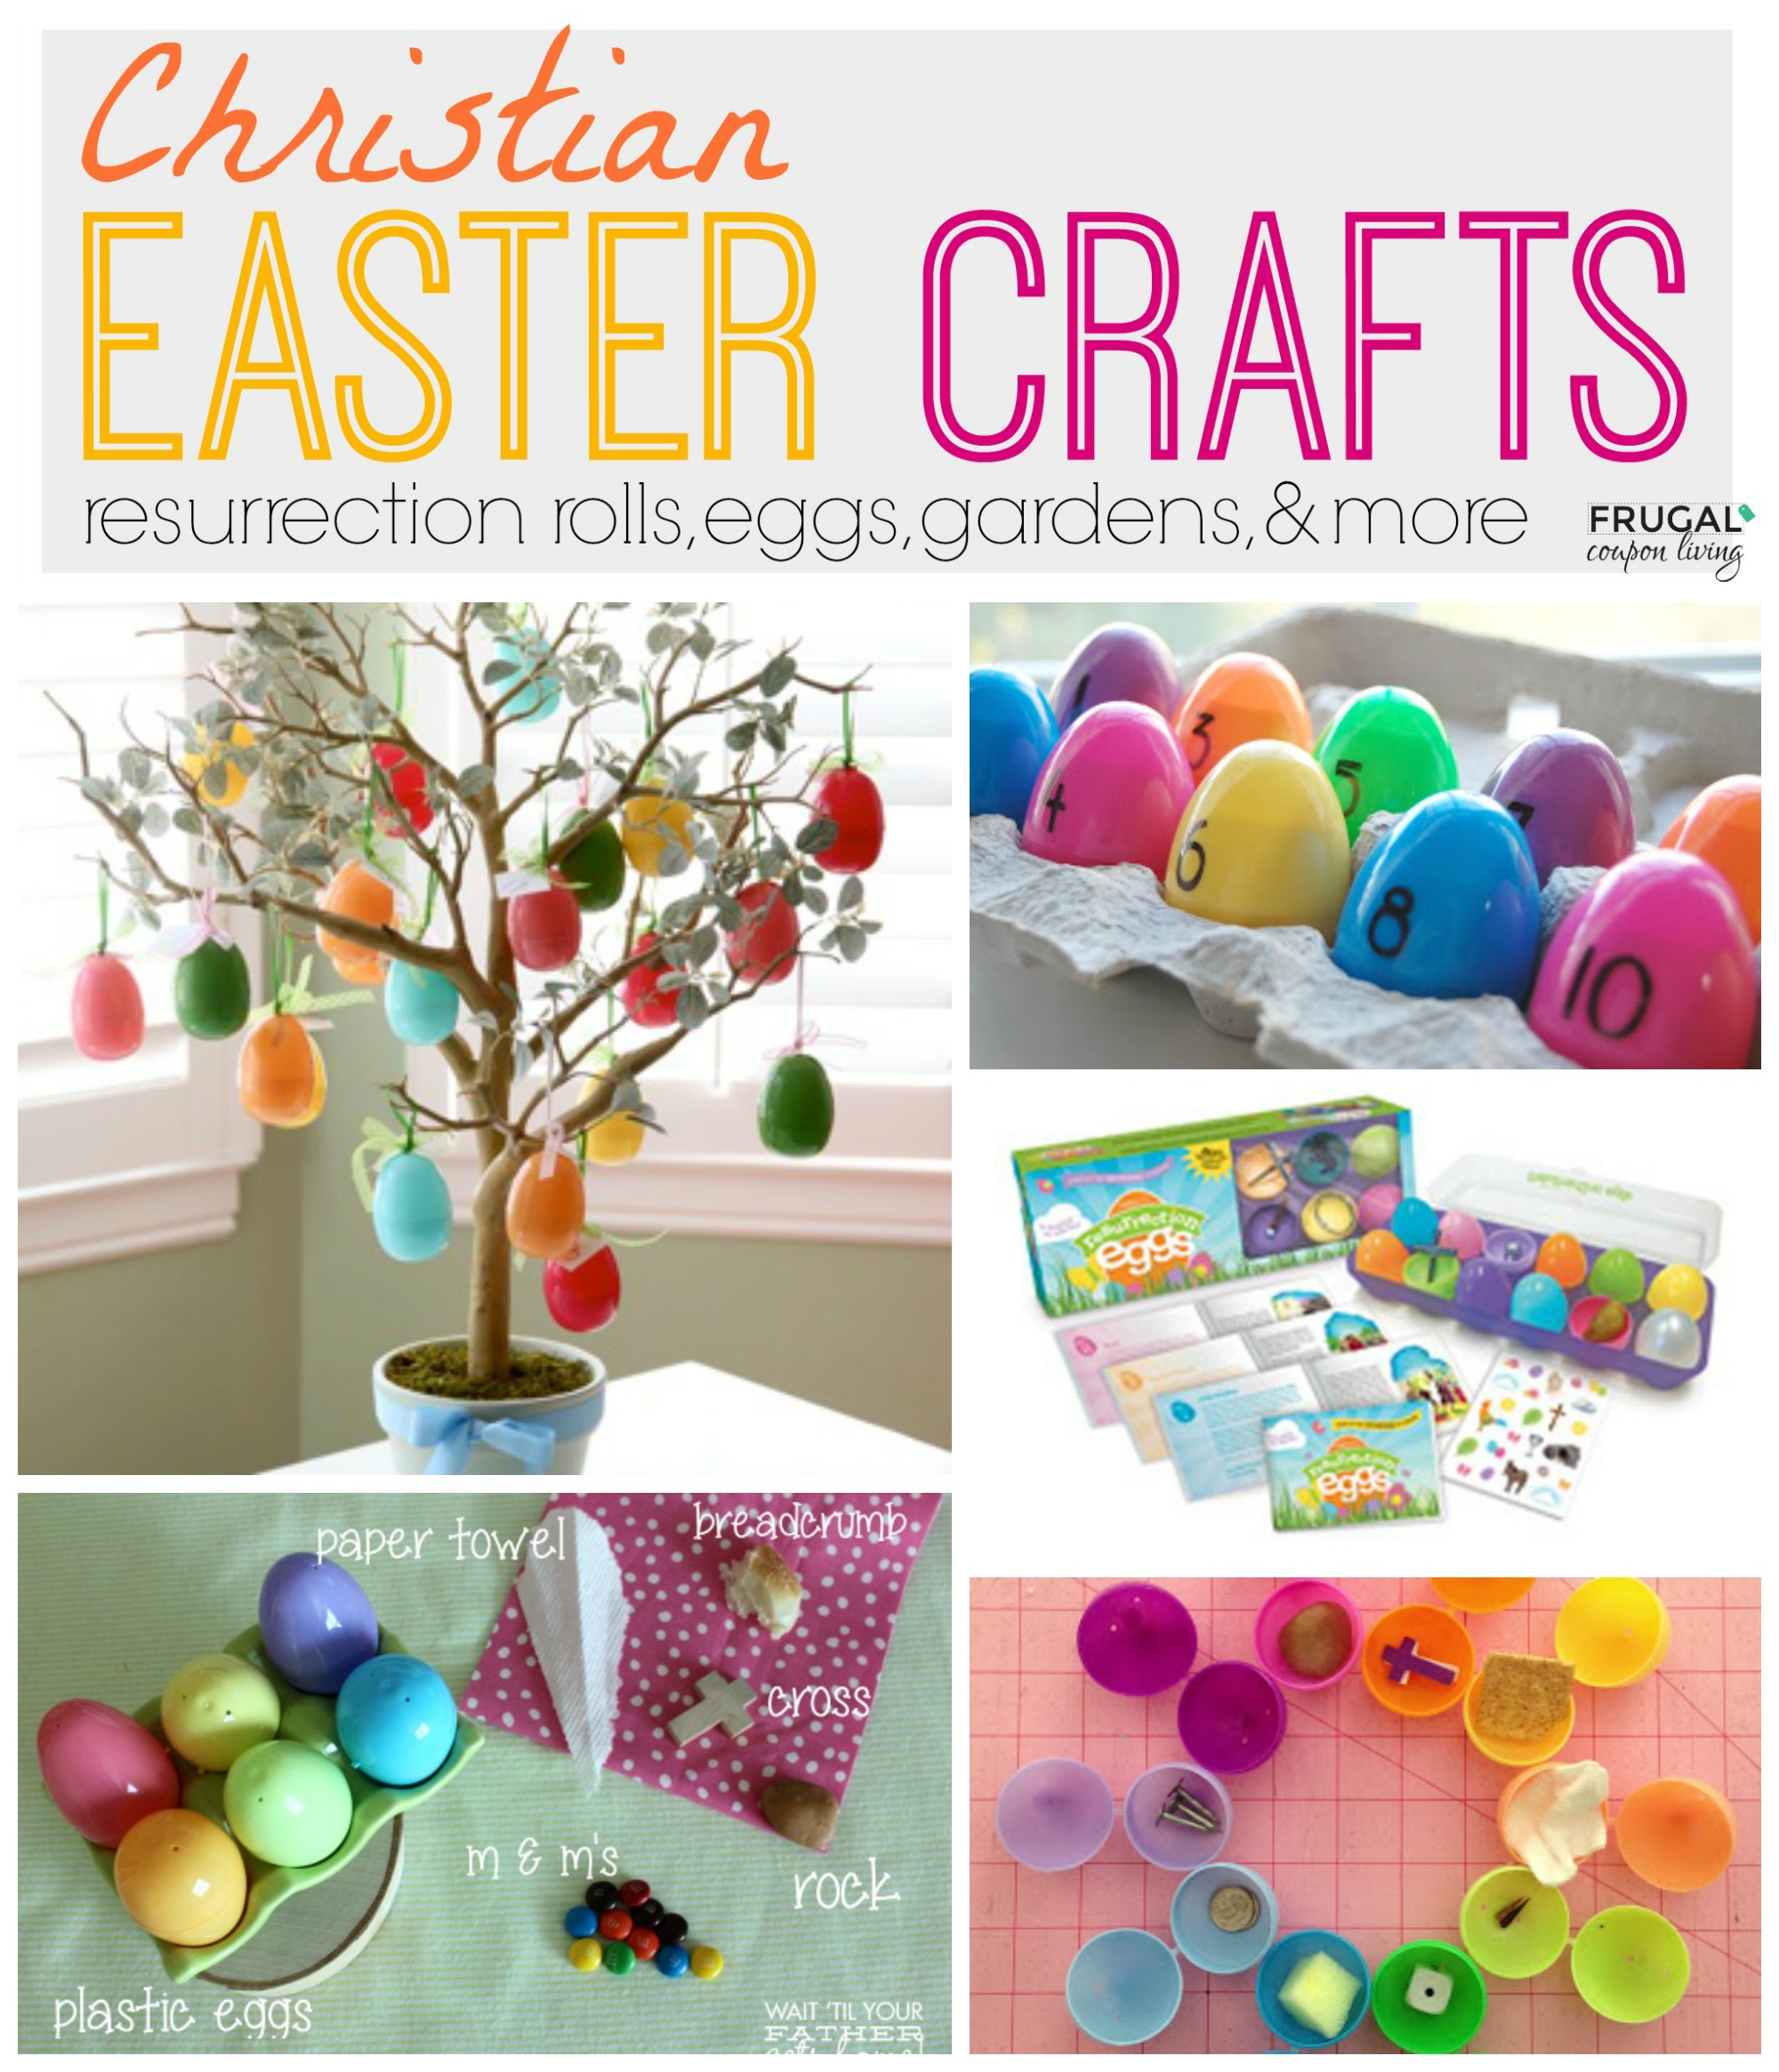 Sunday School Easter Crafts for Kids to Make - Crafty Morning